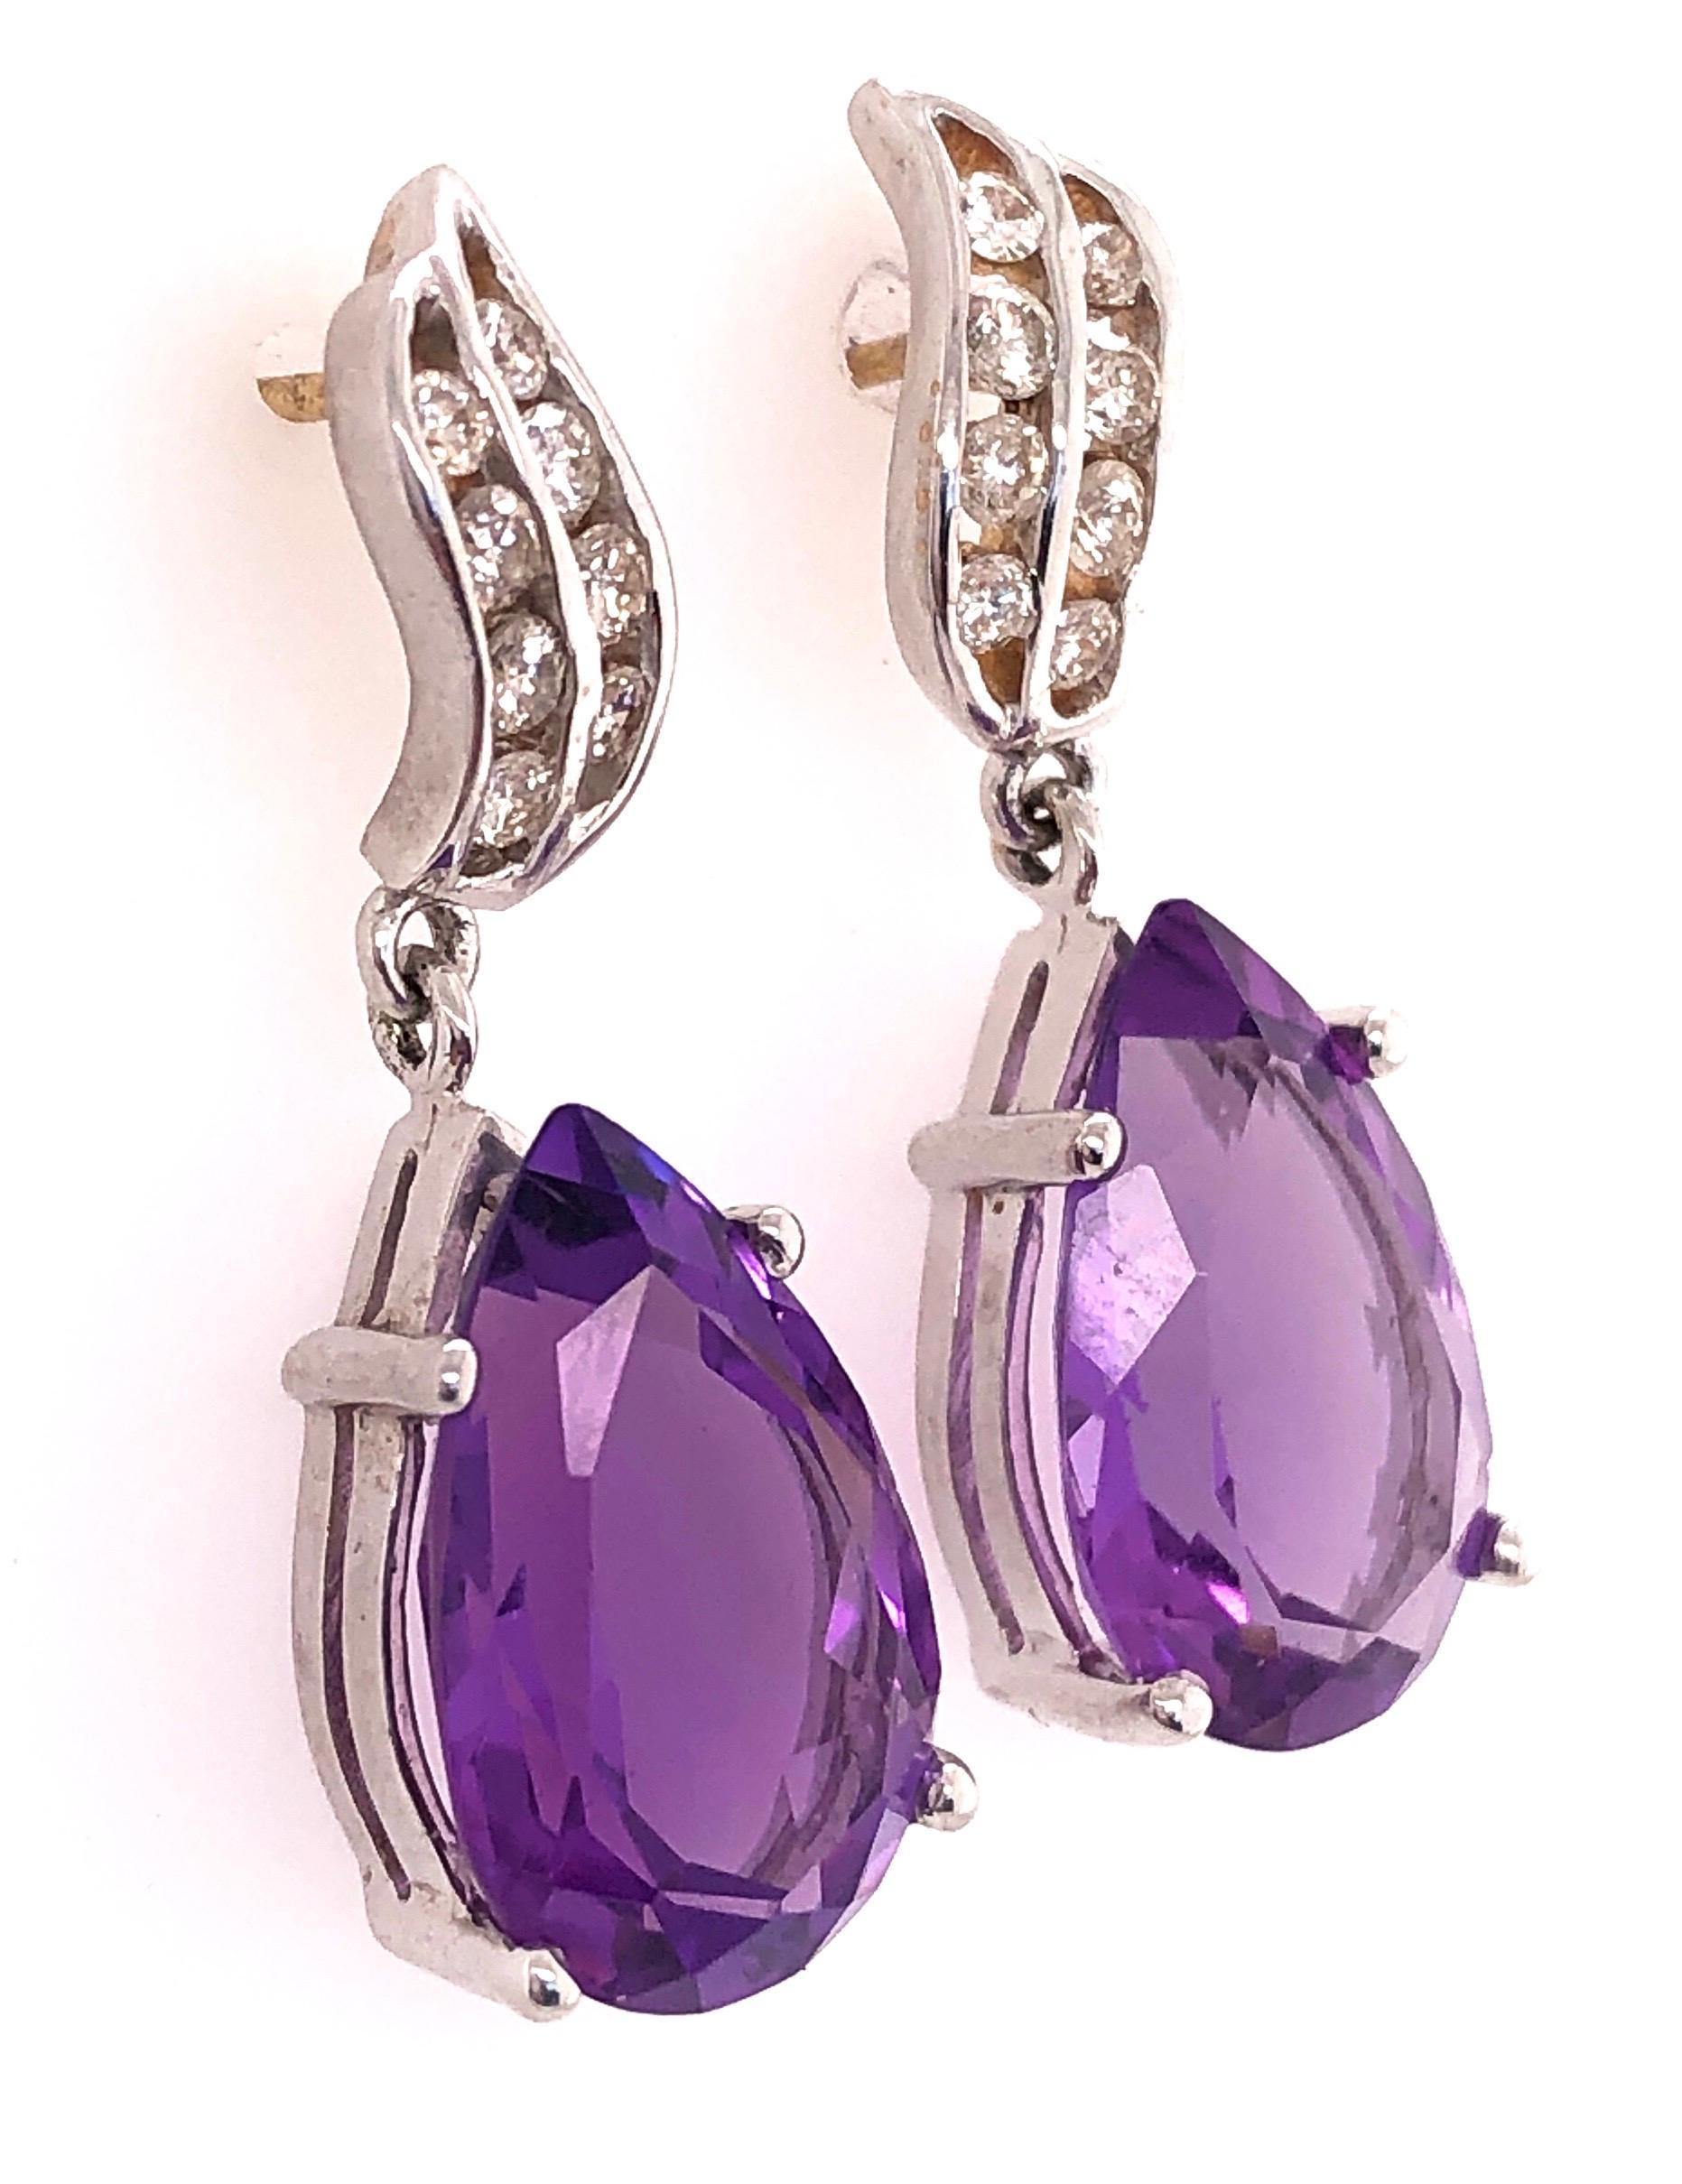 Modern 14 Karat Gold Earrings with Diamonds and Amethysts 0.50 Total Diamond Weight For Sale